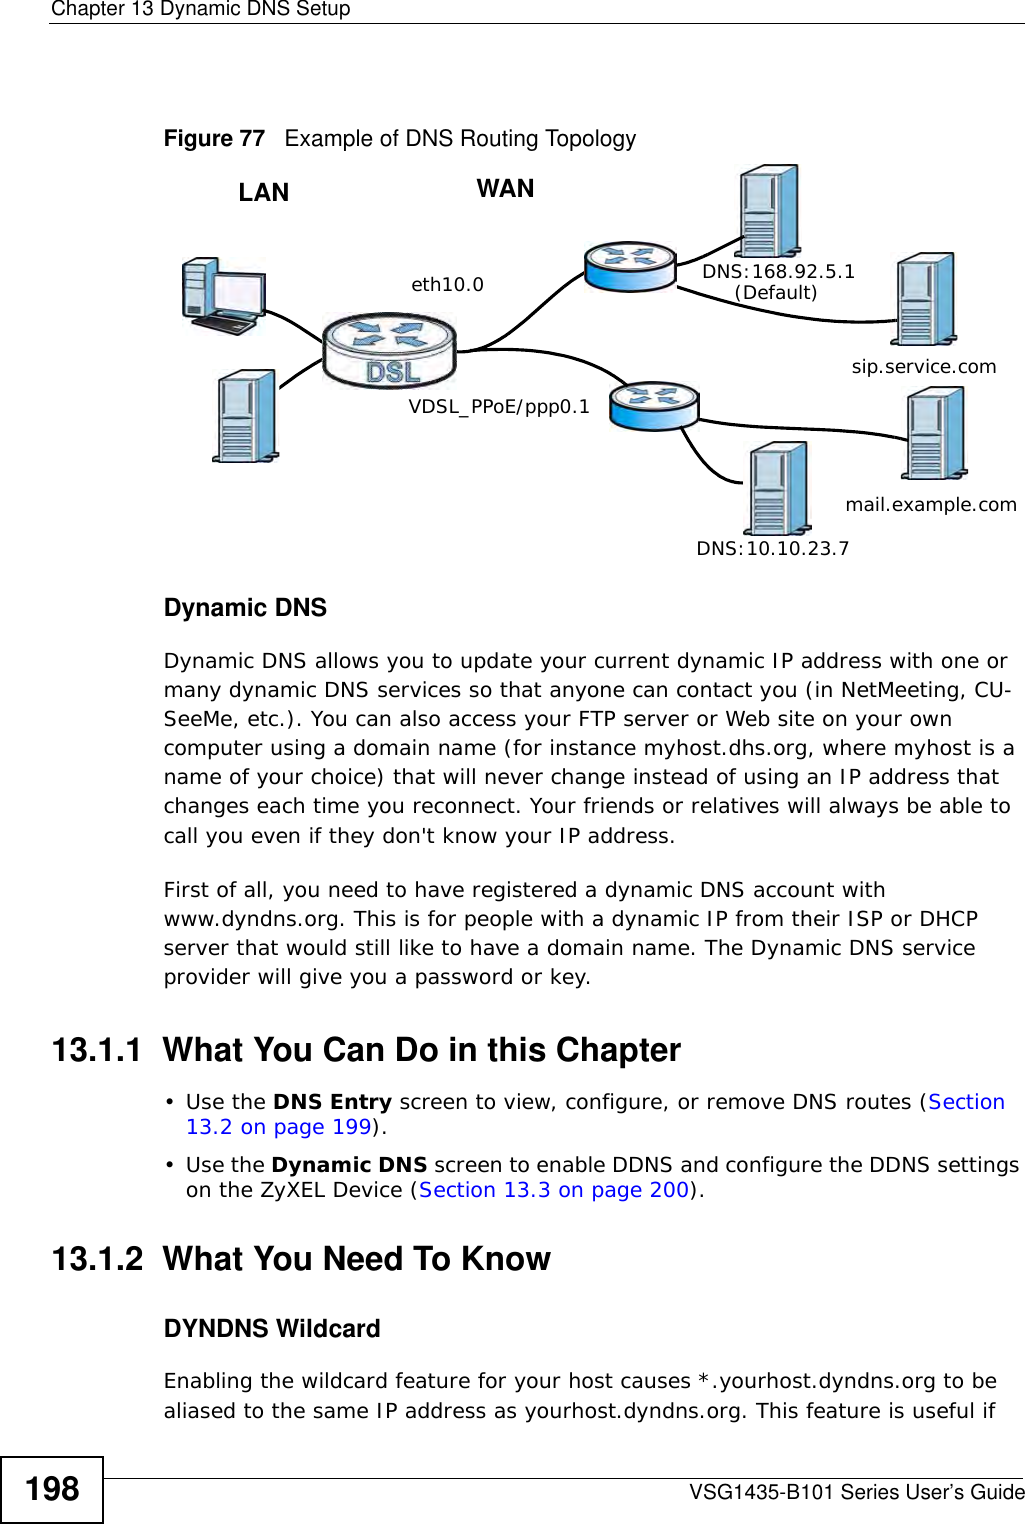 Chapter 13 Dynamic DNS SetupVSG1435-B101 Series User’s Guide198Figure 77   Example of DNS Routing TopologyDynamic DNSDynamic DNS allows you to update your current dynamic IP address with one or many dynamic DNS services so that anyone can contact you (in NetMeeting, CU-SeeMe, etc.). You can also access your FTP server or Web site on your own computer using a domain name (for instance myhost.dhs.org, where myhost is a name of your choice) that will never change instead of using an IP address that changes each time you reconnect. Your friends or relatives will always be able to call you even if they don&apos;t know your IP address.First of all, you need to have registered a dynamic DNS account with www.dyndns.org. This is for people with a dynamic IP from their ISP or DHCP server that would still like to have a domain name. The Dynamic DNS service provider will give you a password or key. 13.1.1  What You Can Do in this Chapter•Use the DNS Entry screen to view, configure, or remove DNS routes (Section 13.2 on page 199).•Use the Dynamic DNS screen to enable DDNS and configure the DDNS settings on the ZyXEL Device (Section 13.3 on page 200).13.1.2  What You Need To KnowDYNDNS WildcardEnabling the wildcard feature for your host causes *.yourhost.dyndns.org to be aliased to the same IP address as yourhost.dyndns.org. This feature is useful if WANLANeth10.0VDSL_PPoE/ppp0.1DNS:10.10.23.7DNS:168.92.5.1sip.service.commail.example.com(Default)